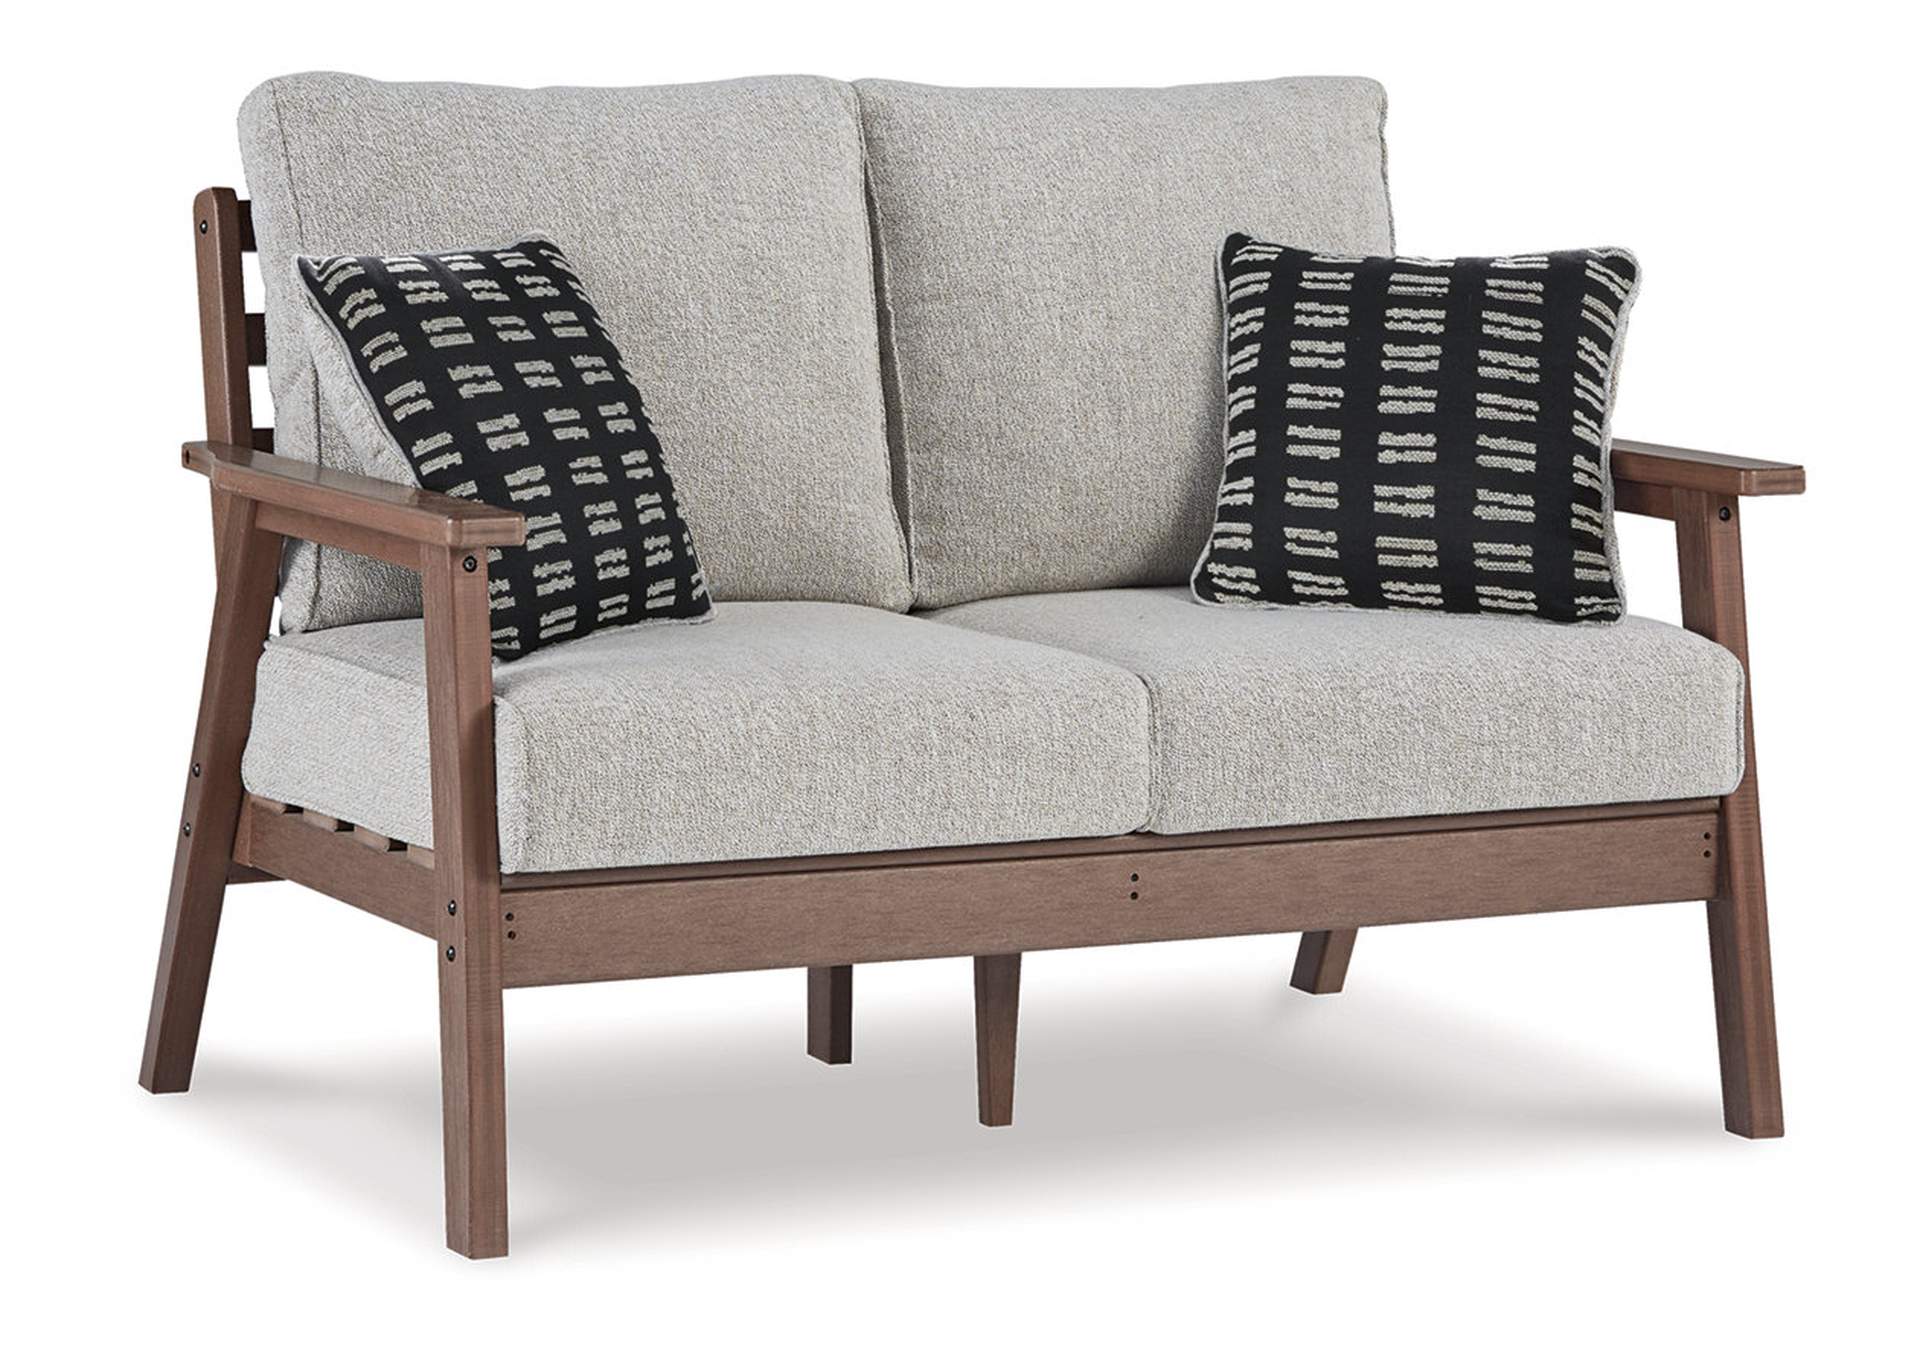 Emmeline Outdoor Loveseat with Cushion,Outdoor By Ashley